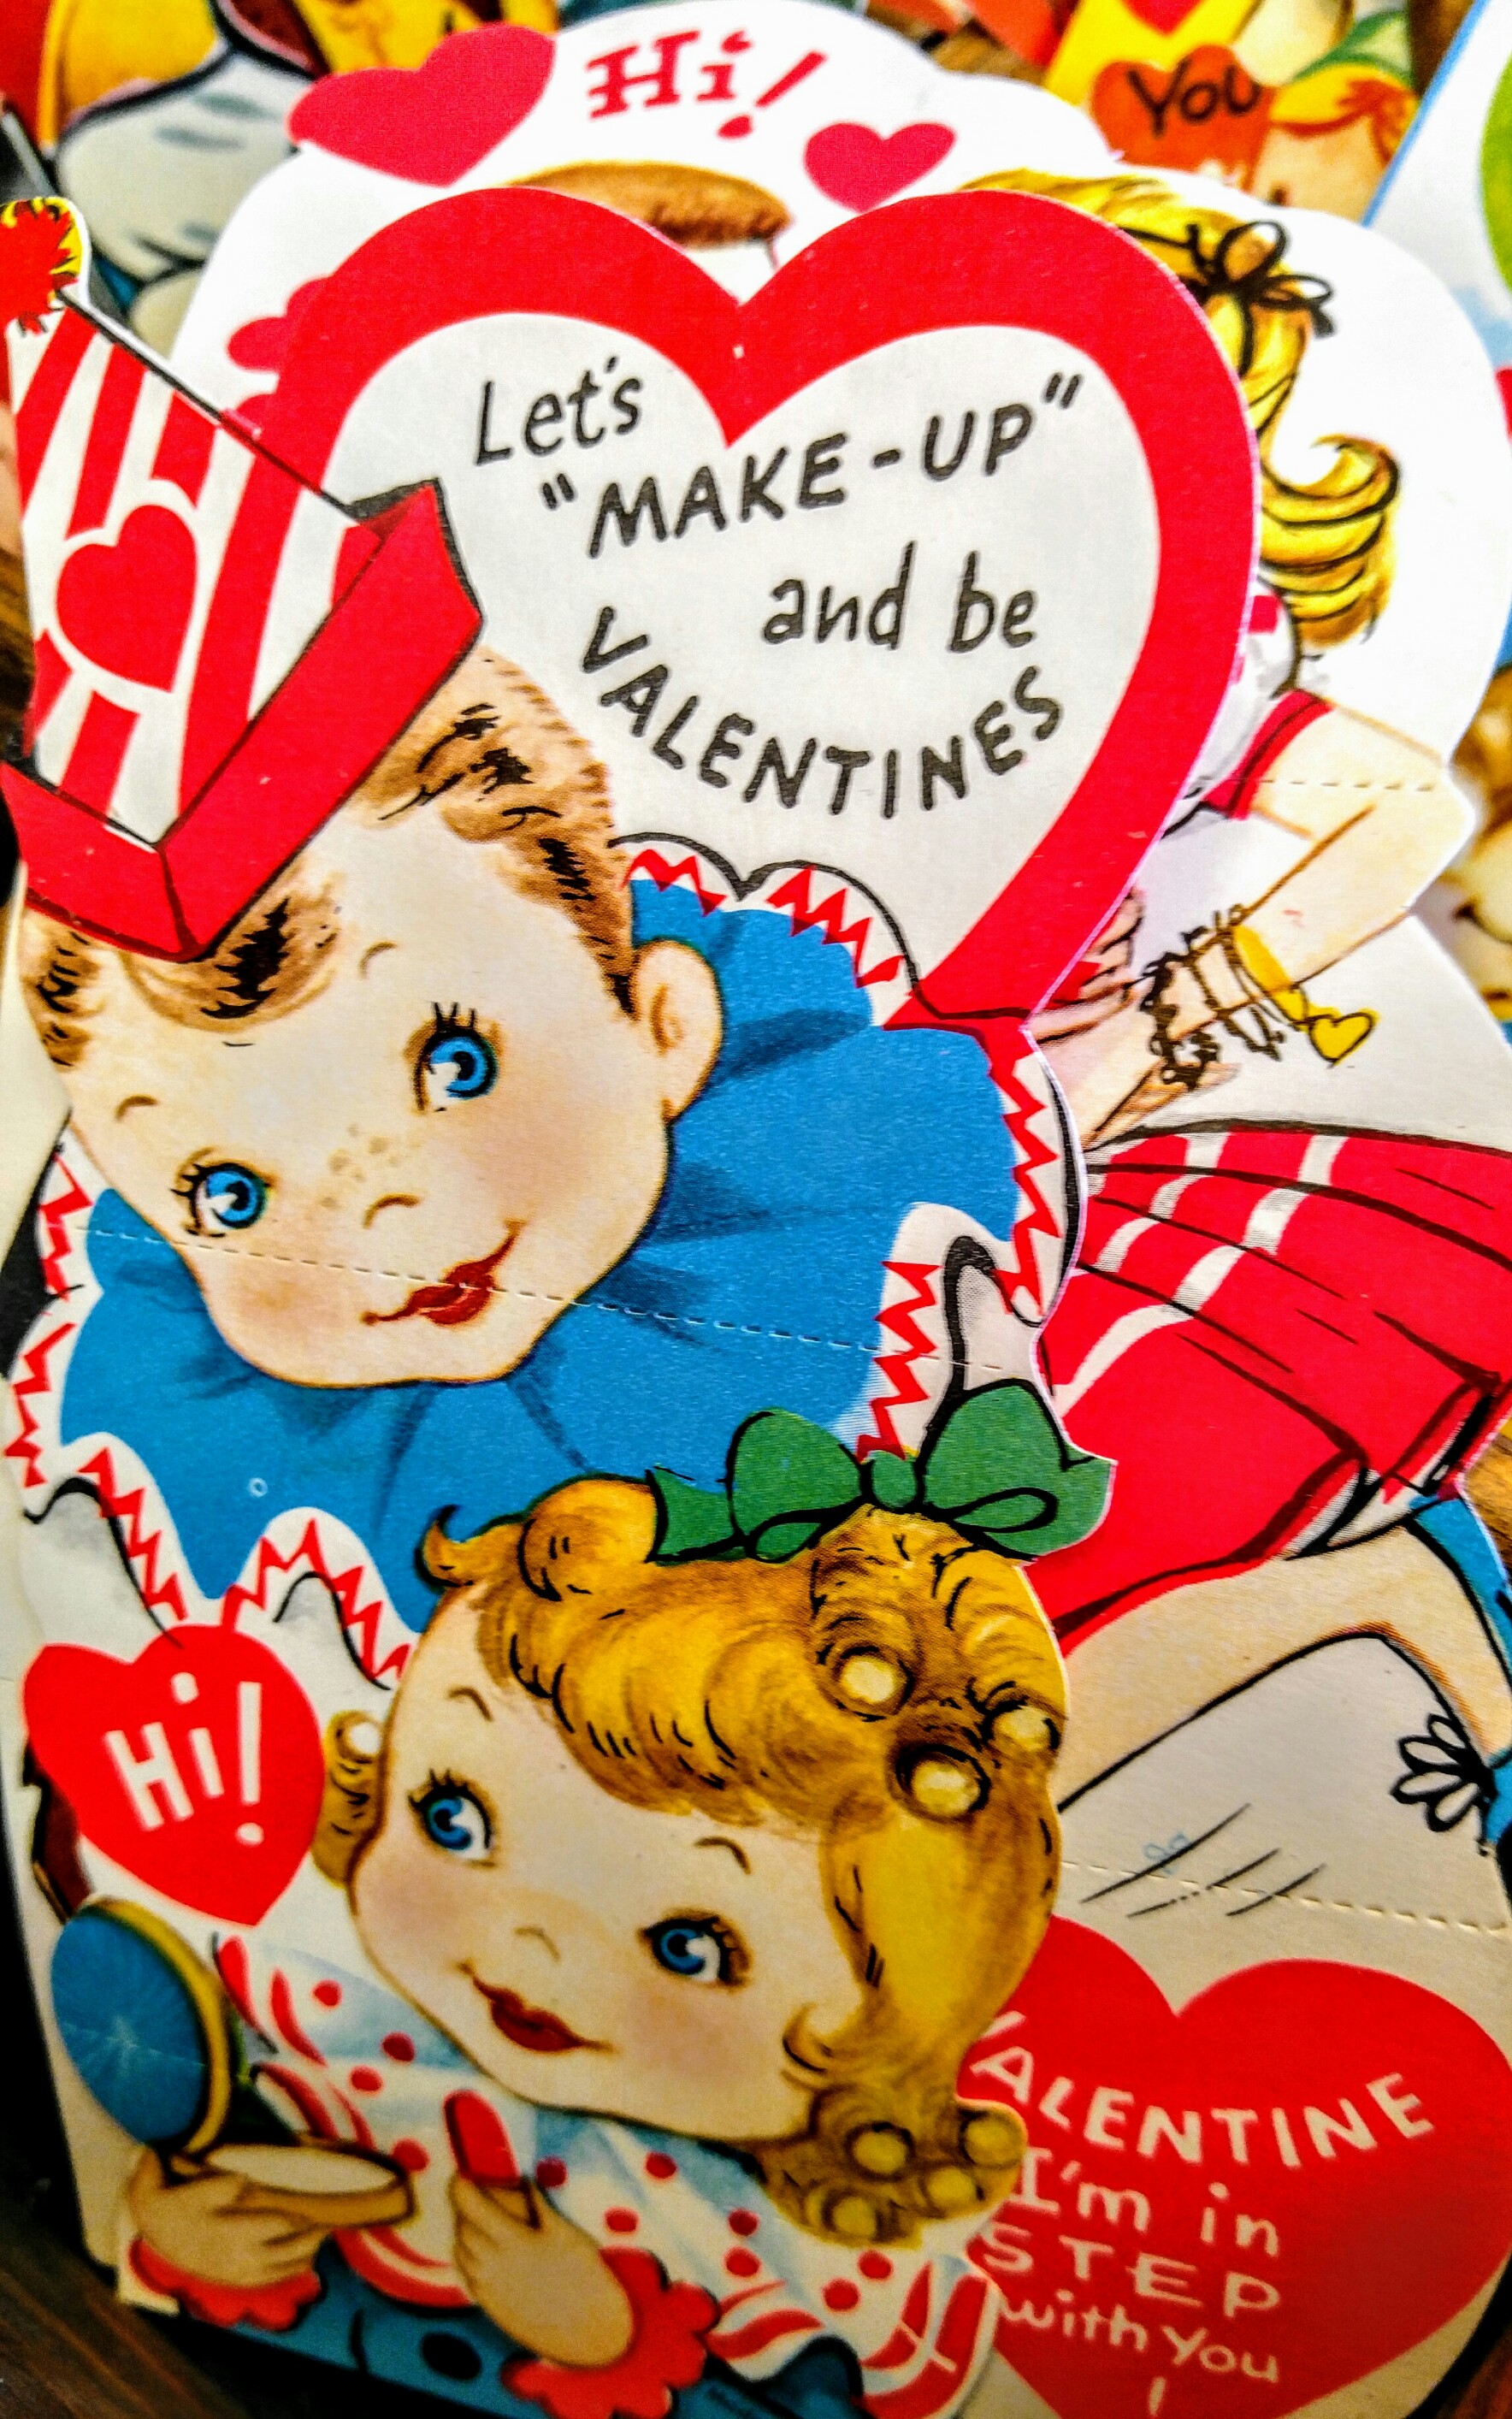 Adorable Vintage Valentines and Victorian Antique Valentine Postcards, early 1900s